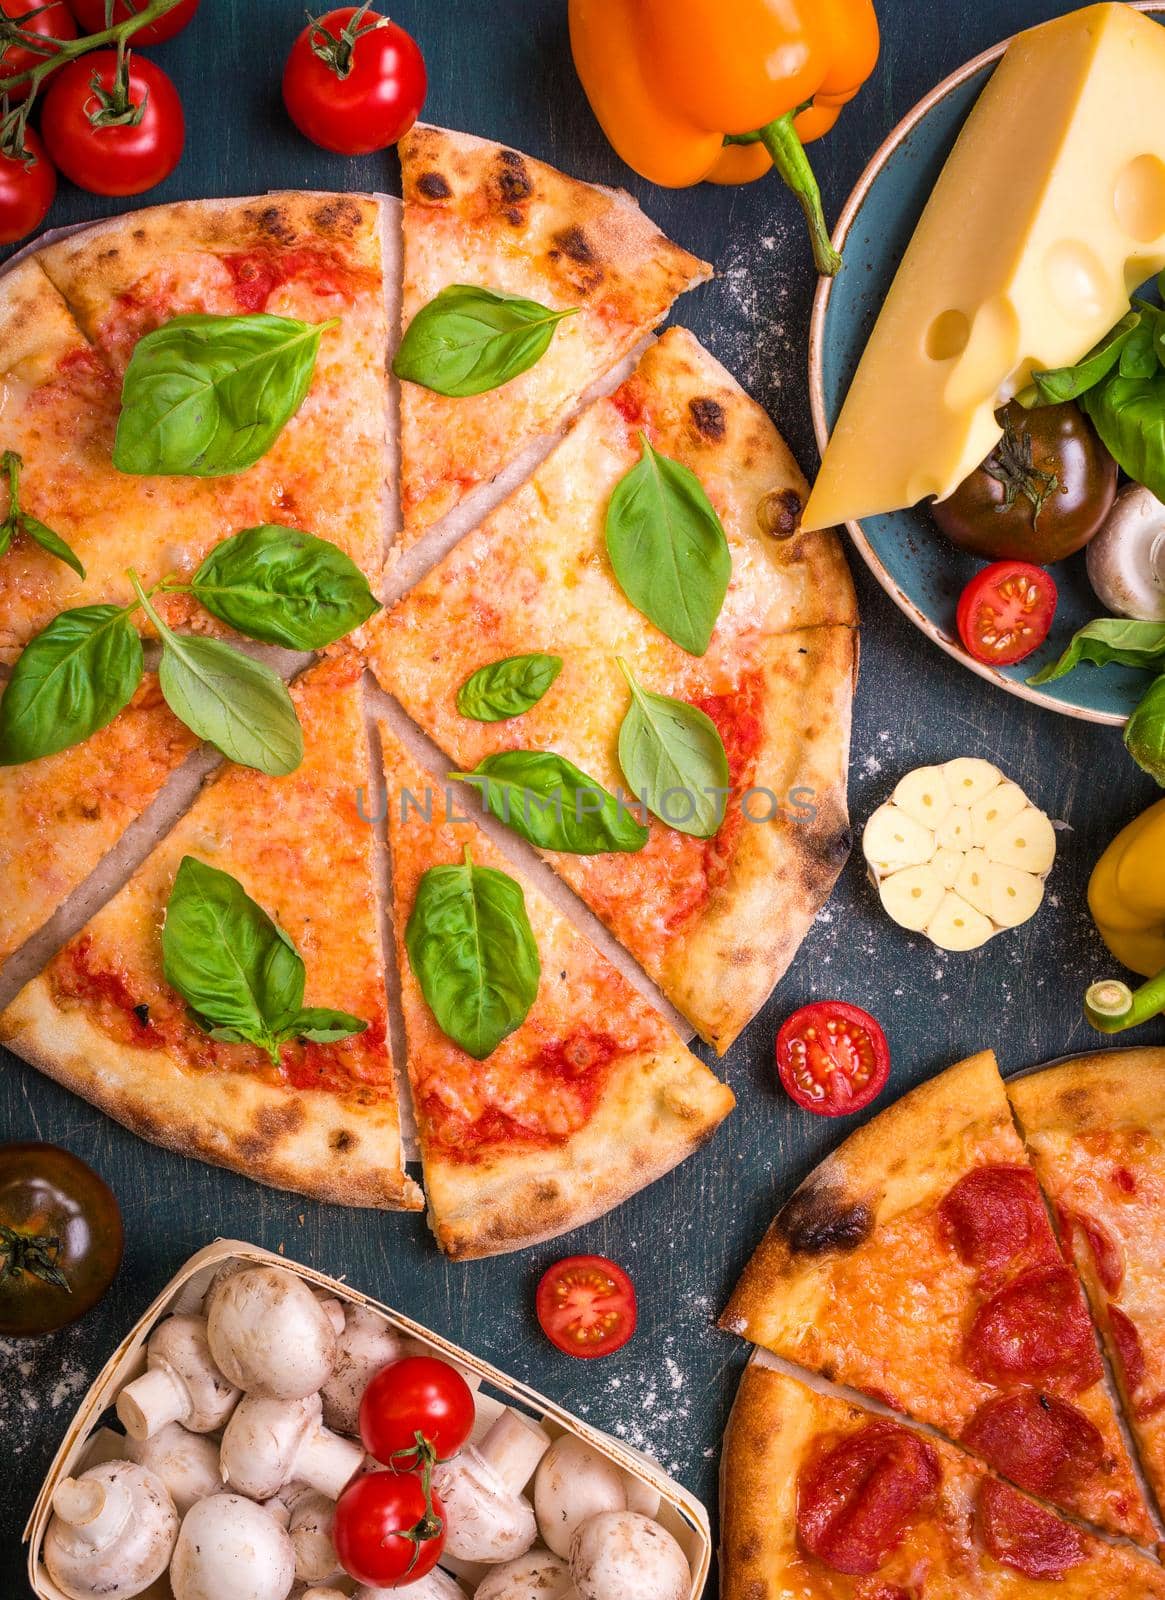 Delicious sliced pizza and ingredients for making pizza. Flour, cheese, tomatoes, basil, pepperoni, mushrooms and rolling pin over wooden background. Top view. Pizza ready to eat